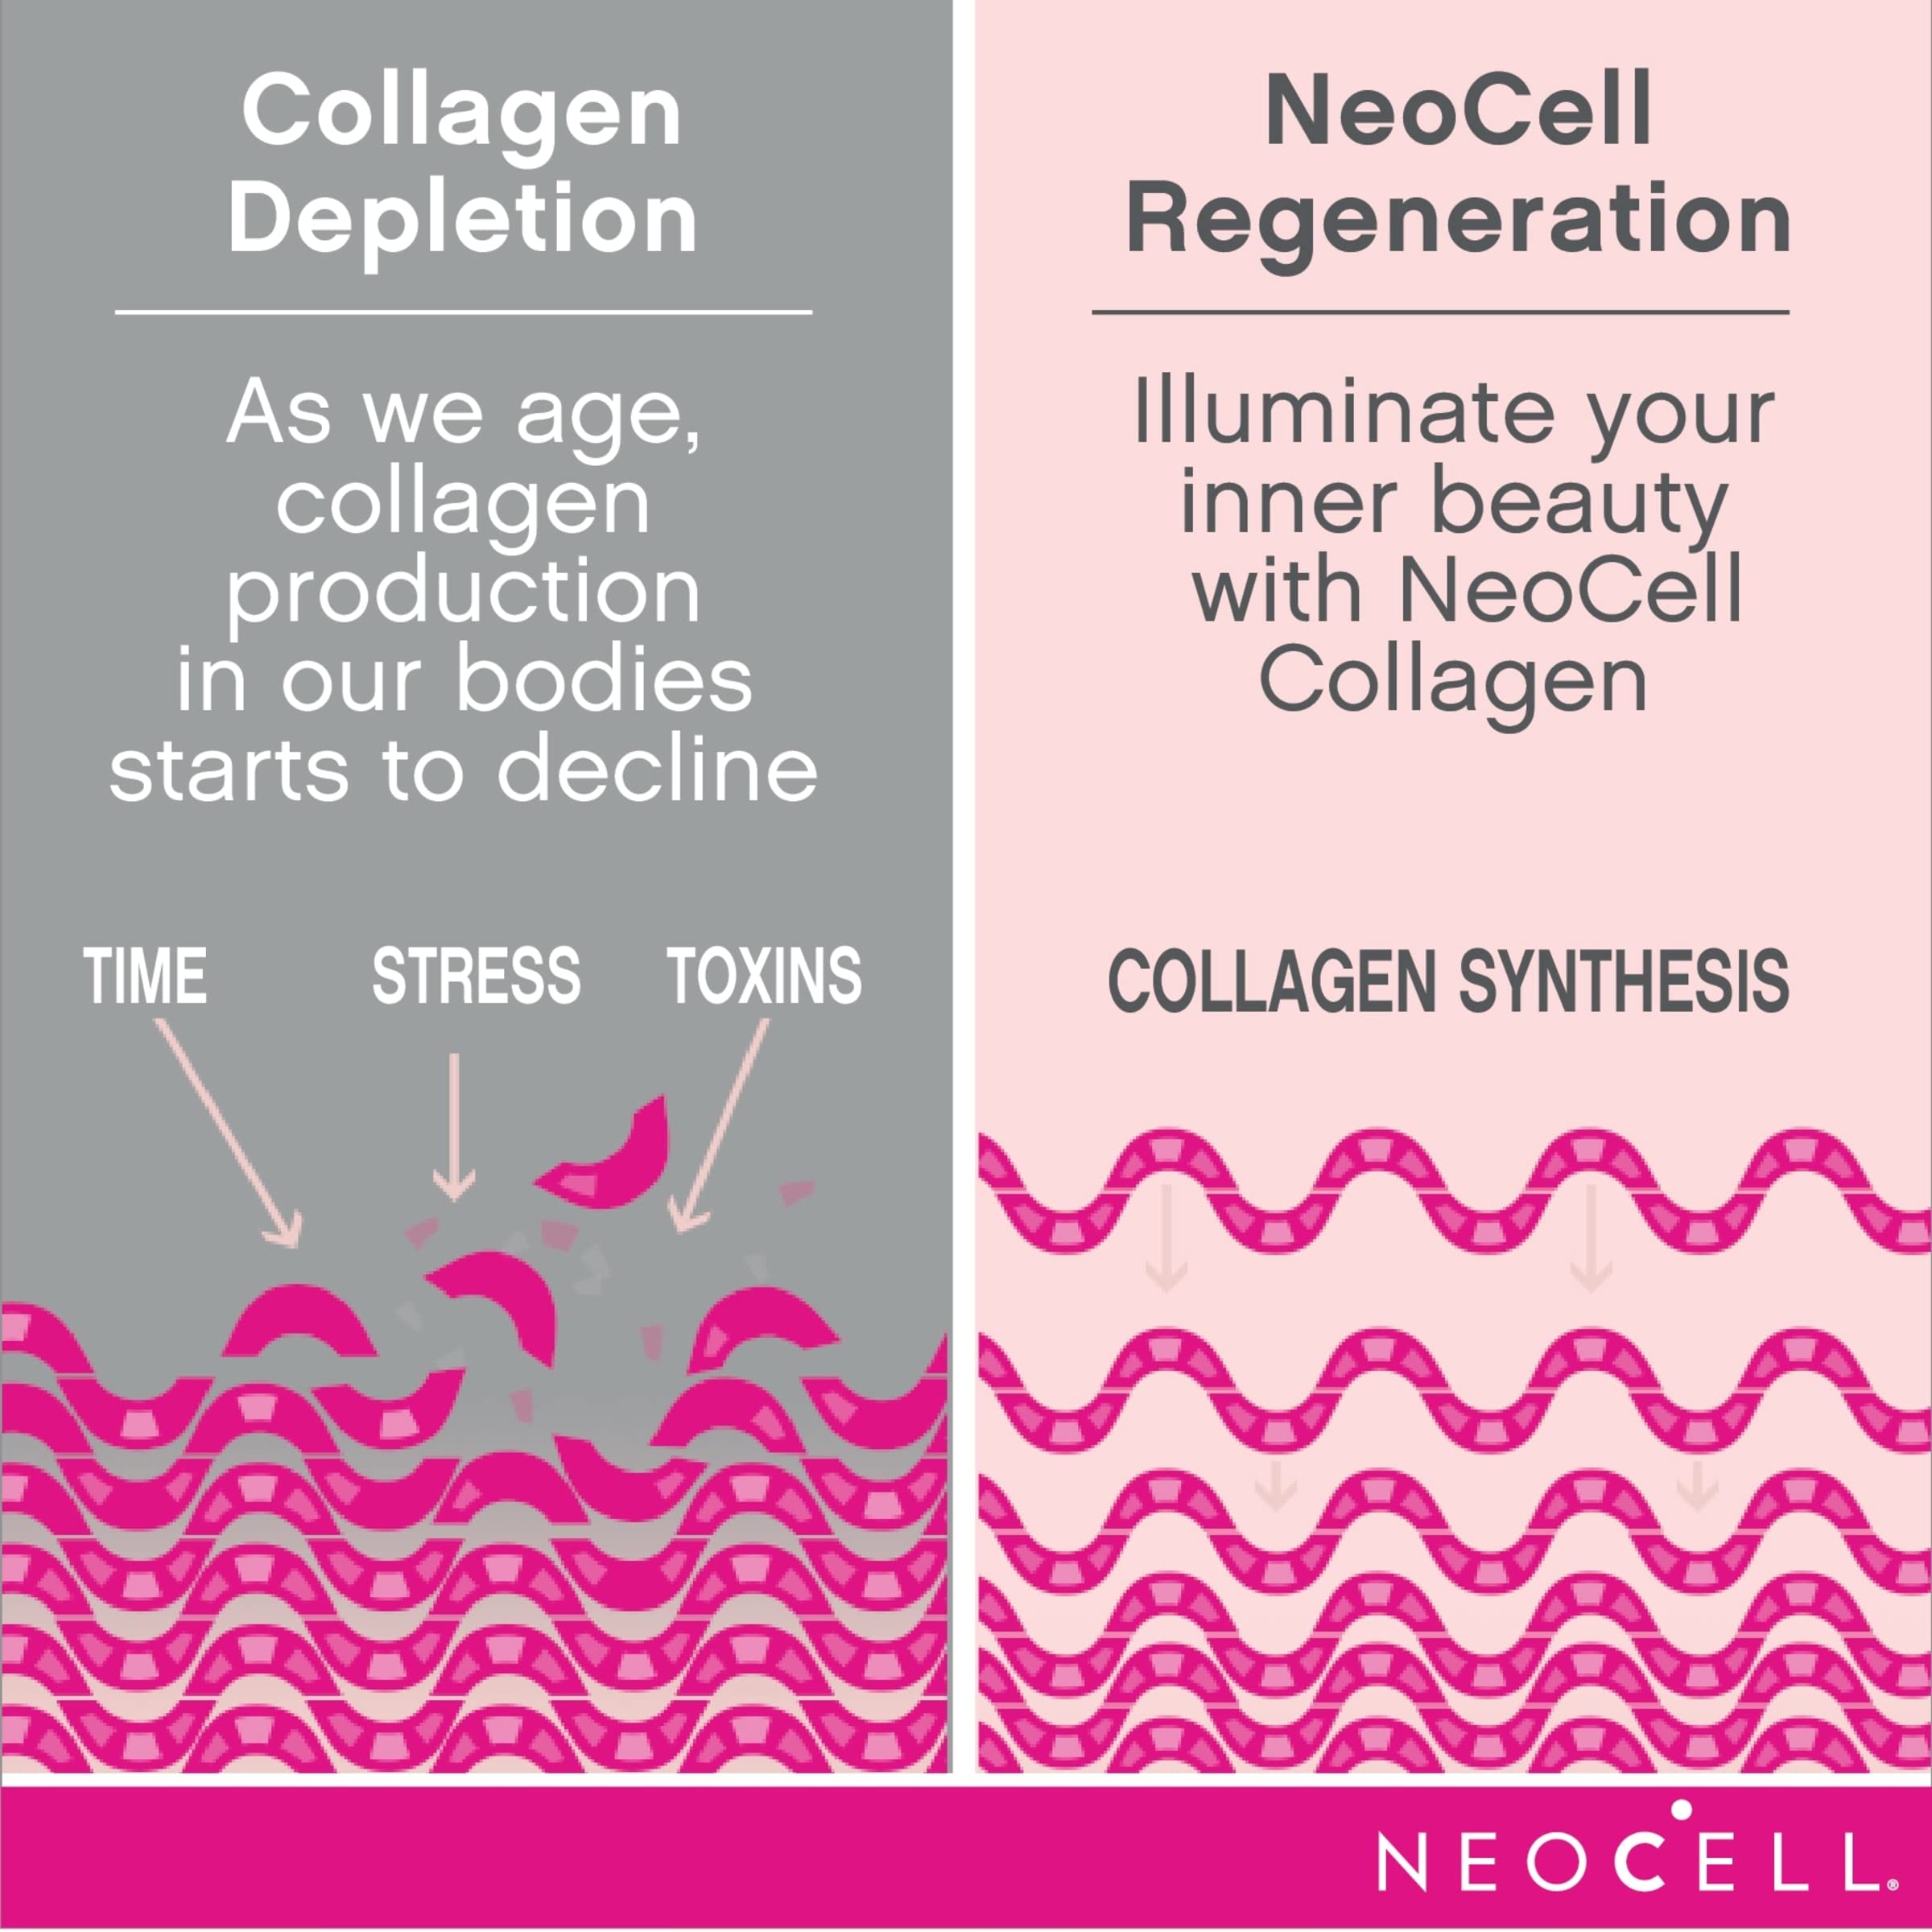 NeoCell Super Collagen with Vitamin C, 250 Collagen Pills, #1 Collagen Tablet Brand, Non-GMO, Grass Fed, Gluten Free, Collagen Peptides Types 1 & 3 for Hair, Skin, Nails & Joints